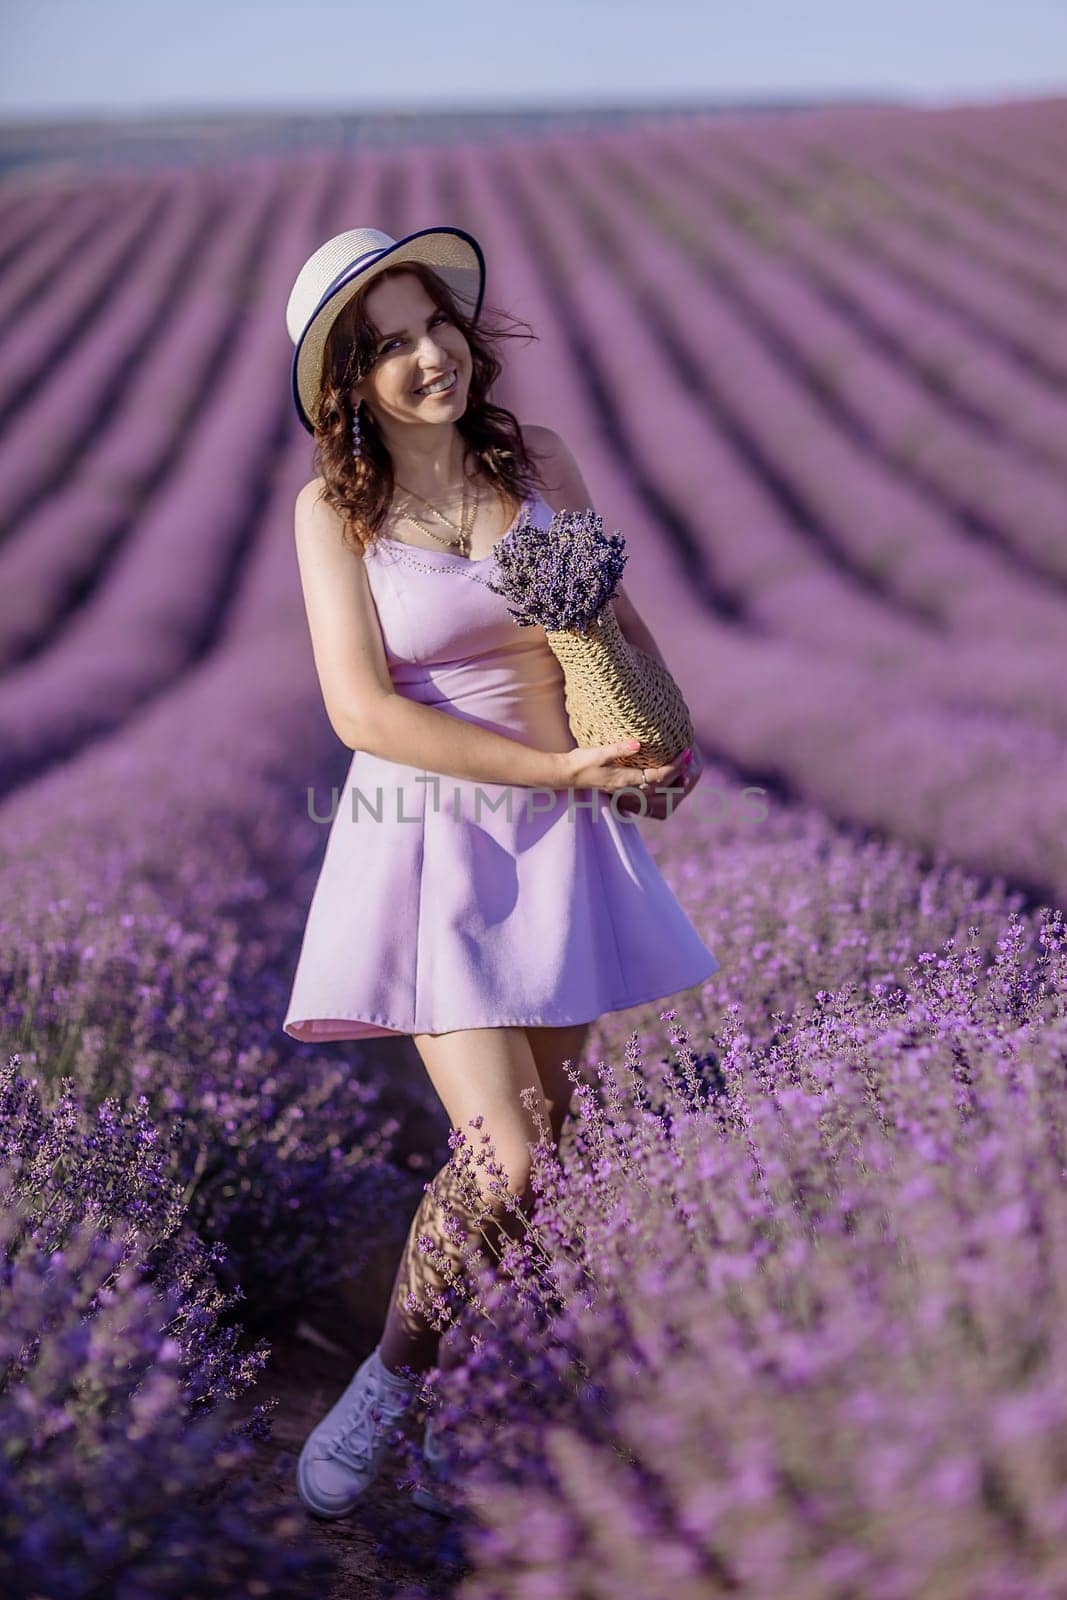 A woman is standing in a field of purple flowers, wearing a white hat and a purple dress. She is holding a bouquet of flowers in her hand. Concept of serenity and beauty. by Matiunina